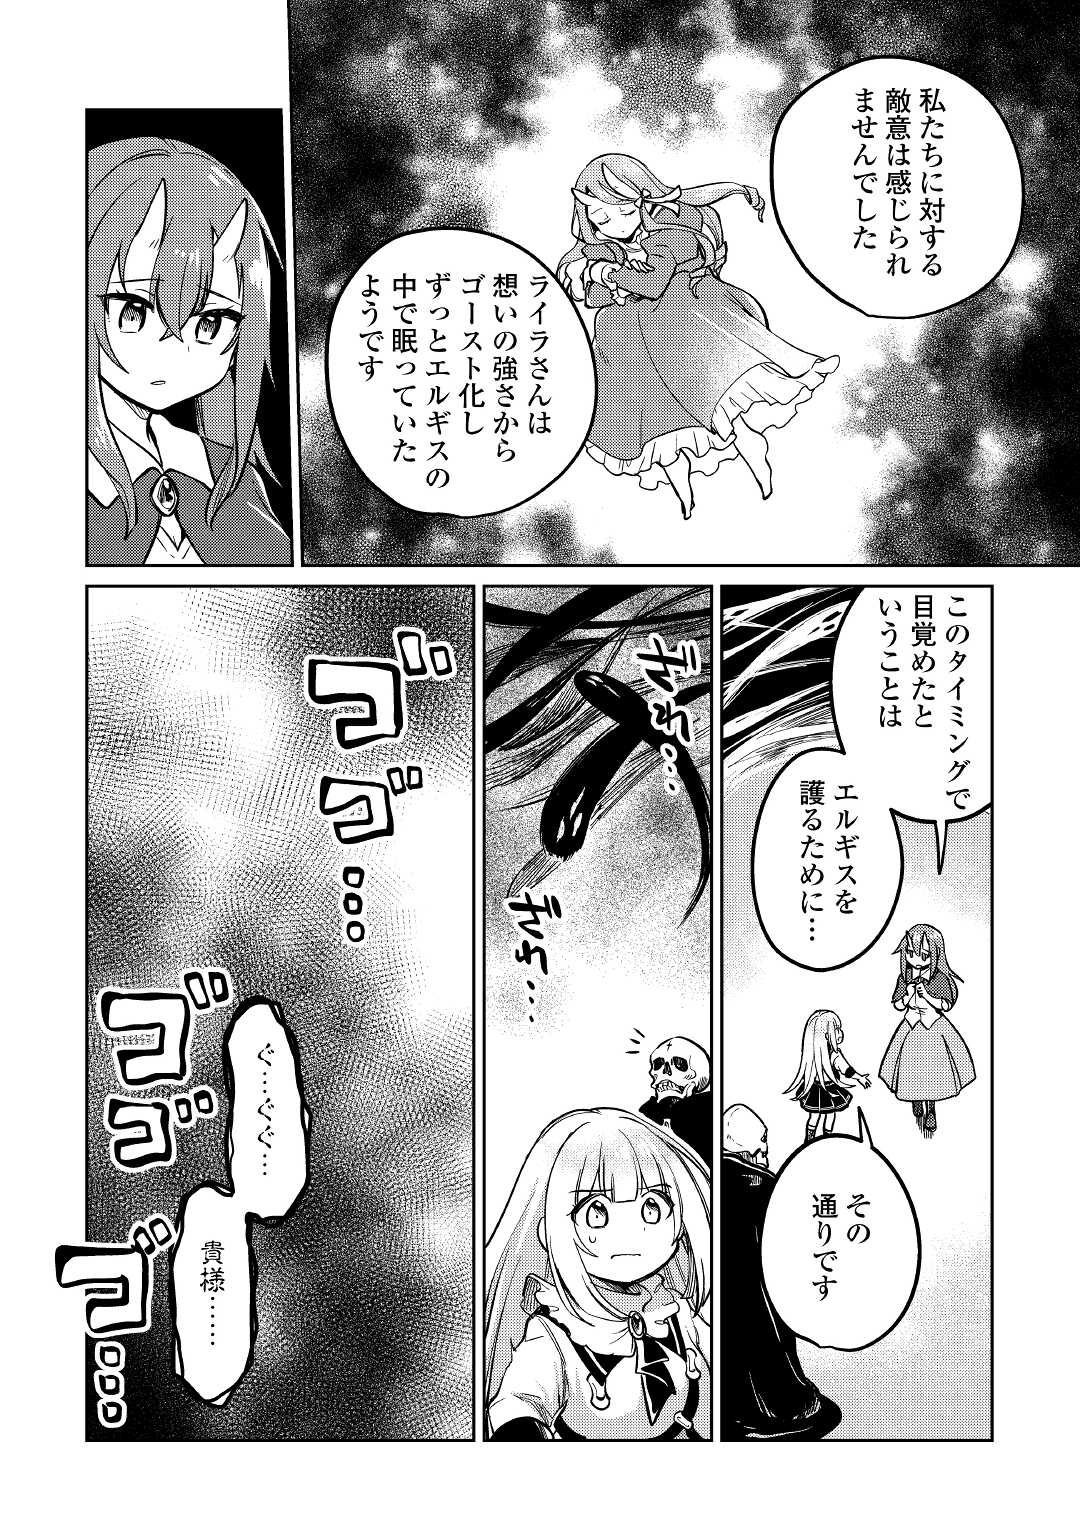 The Former Structural Researcher’s Story of Otherworldly Adventure 第40話 - Page 8